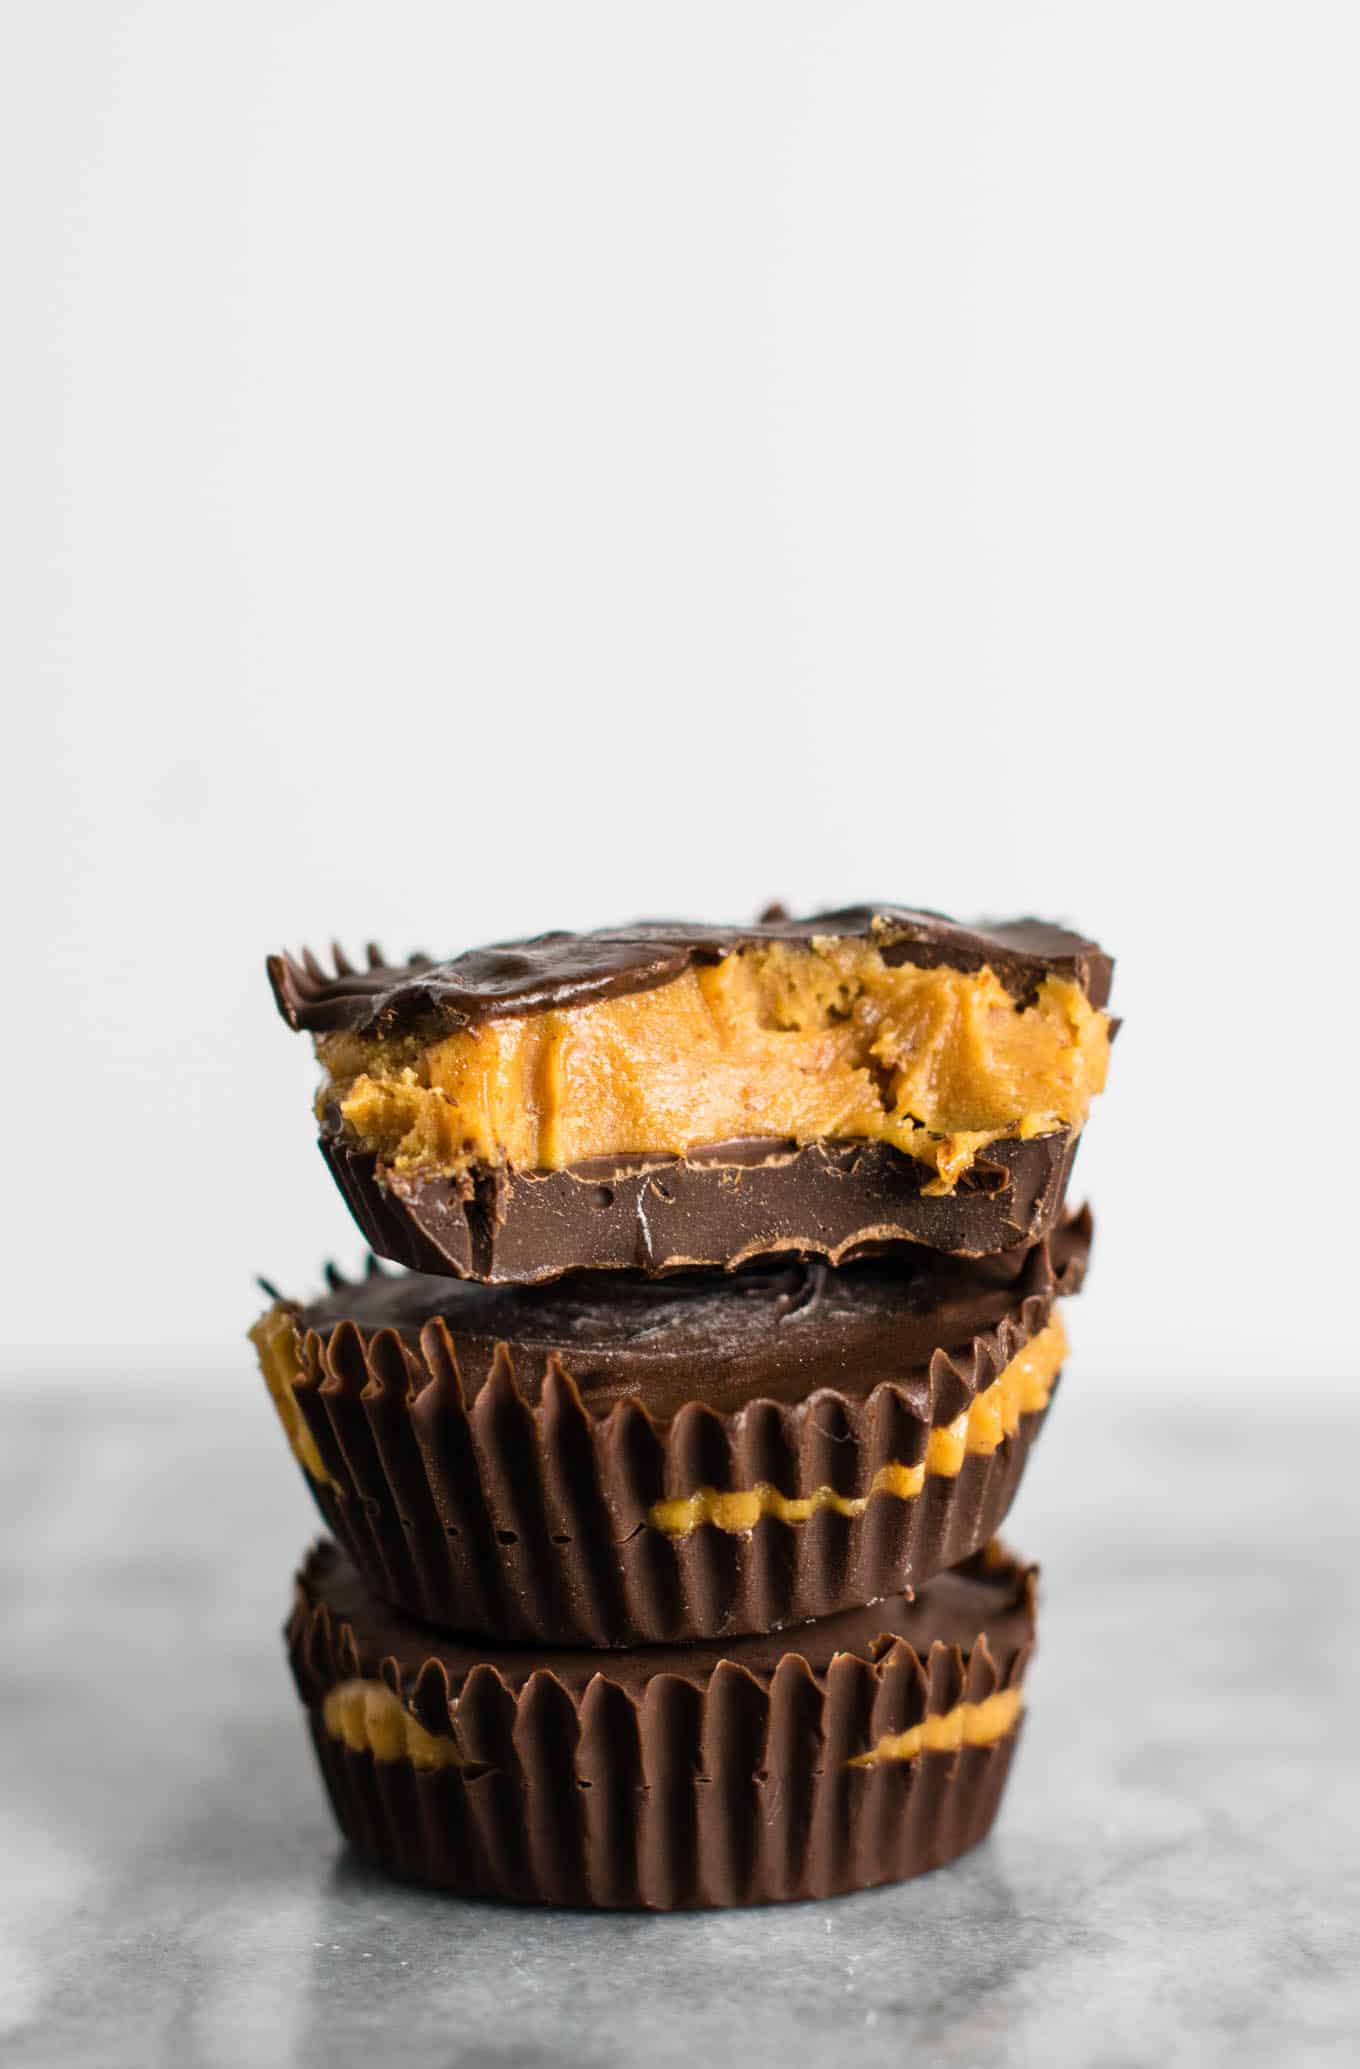 Chocolate Protein Peanut Butter Cups